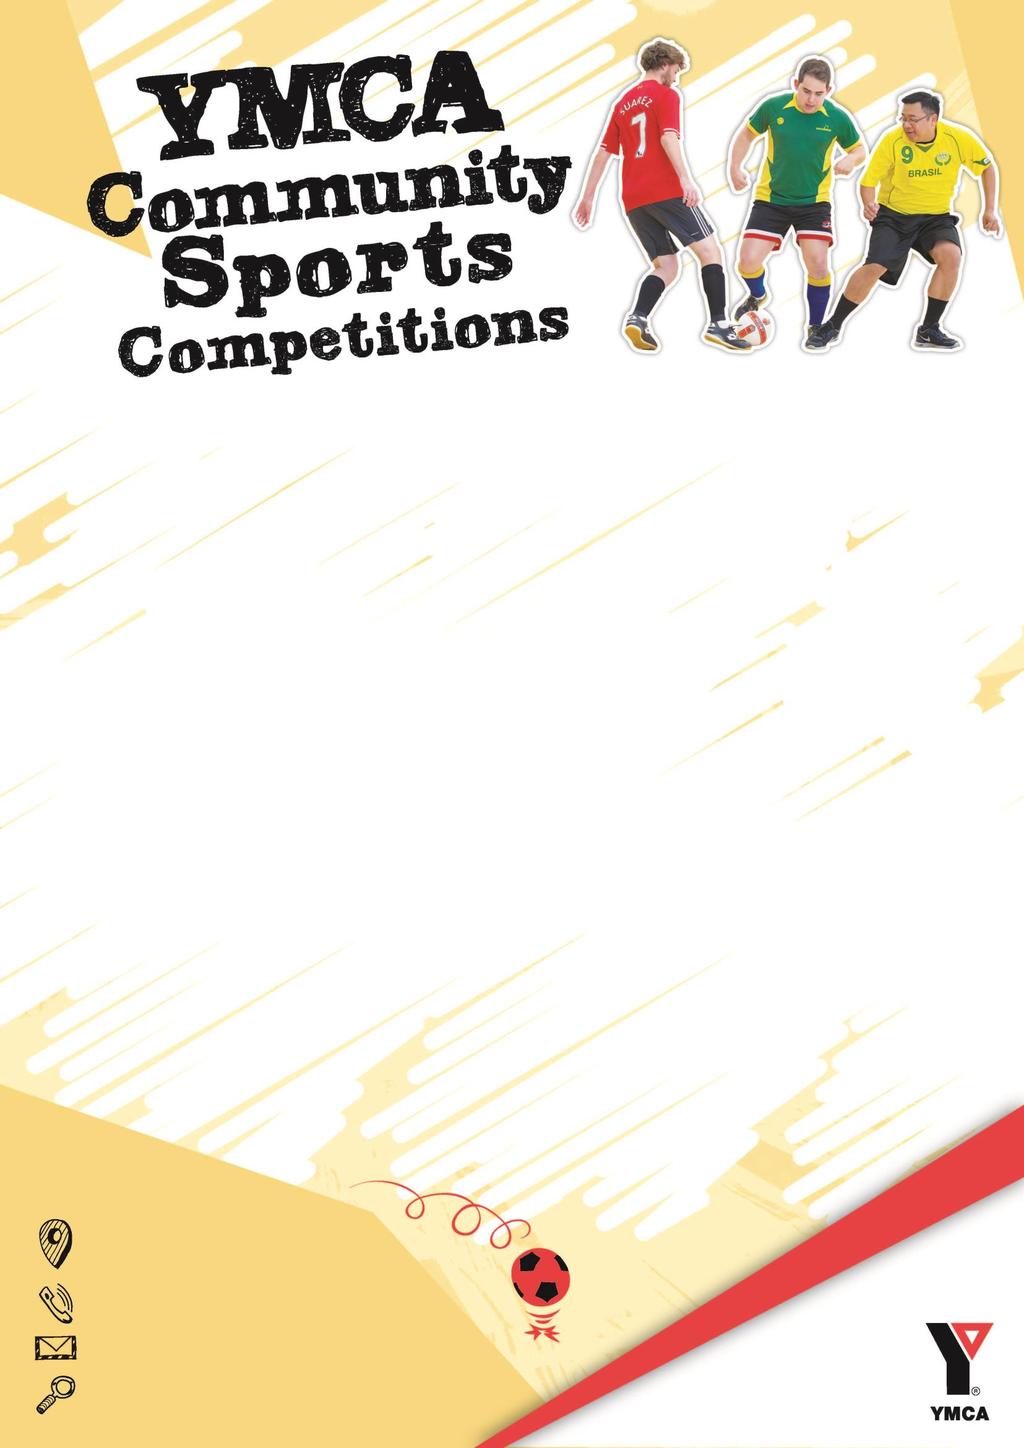 Indoor Soccer Competition Information Pack Welcome and thank you for choosing the YMCA indoor sports competitions at Hawkesbury Indoor Stadium.